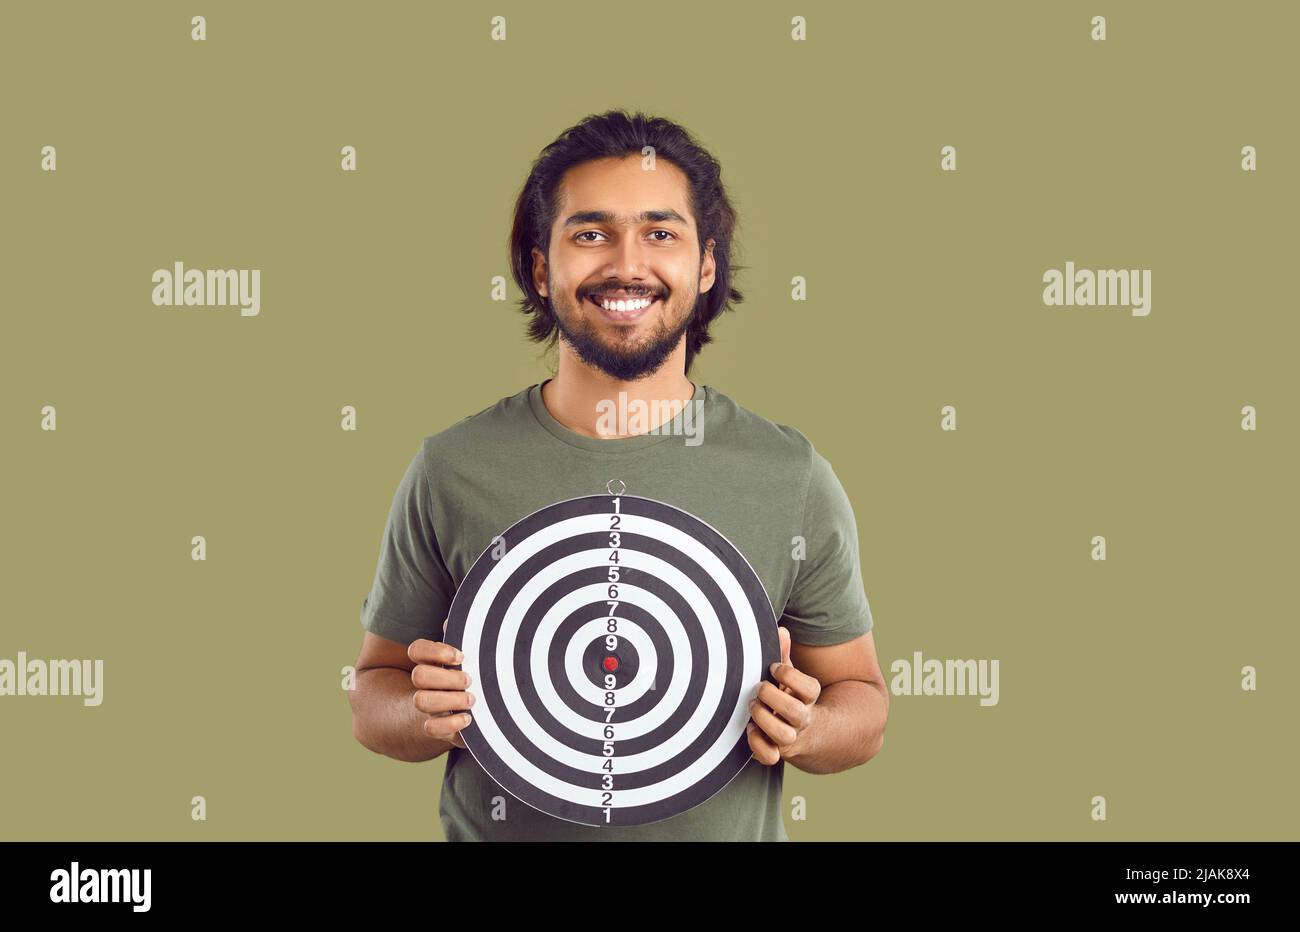 Happy smiling Indian guy holding shooting target to show concept of setting goals Stock Photo